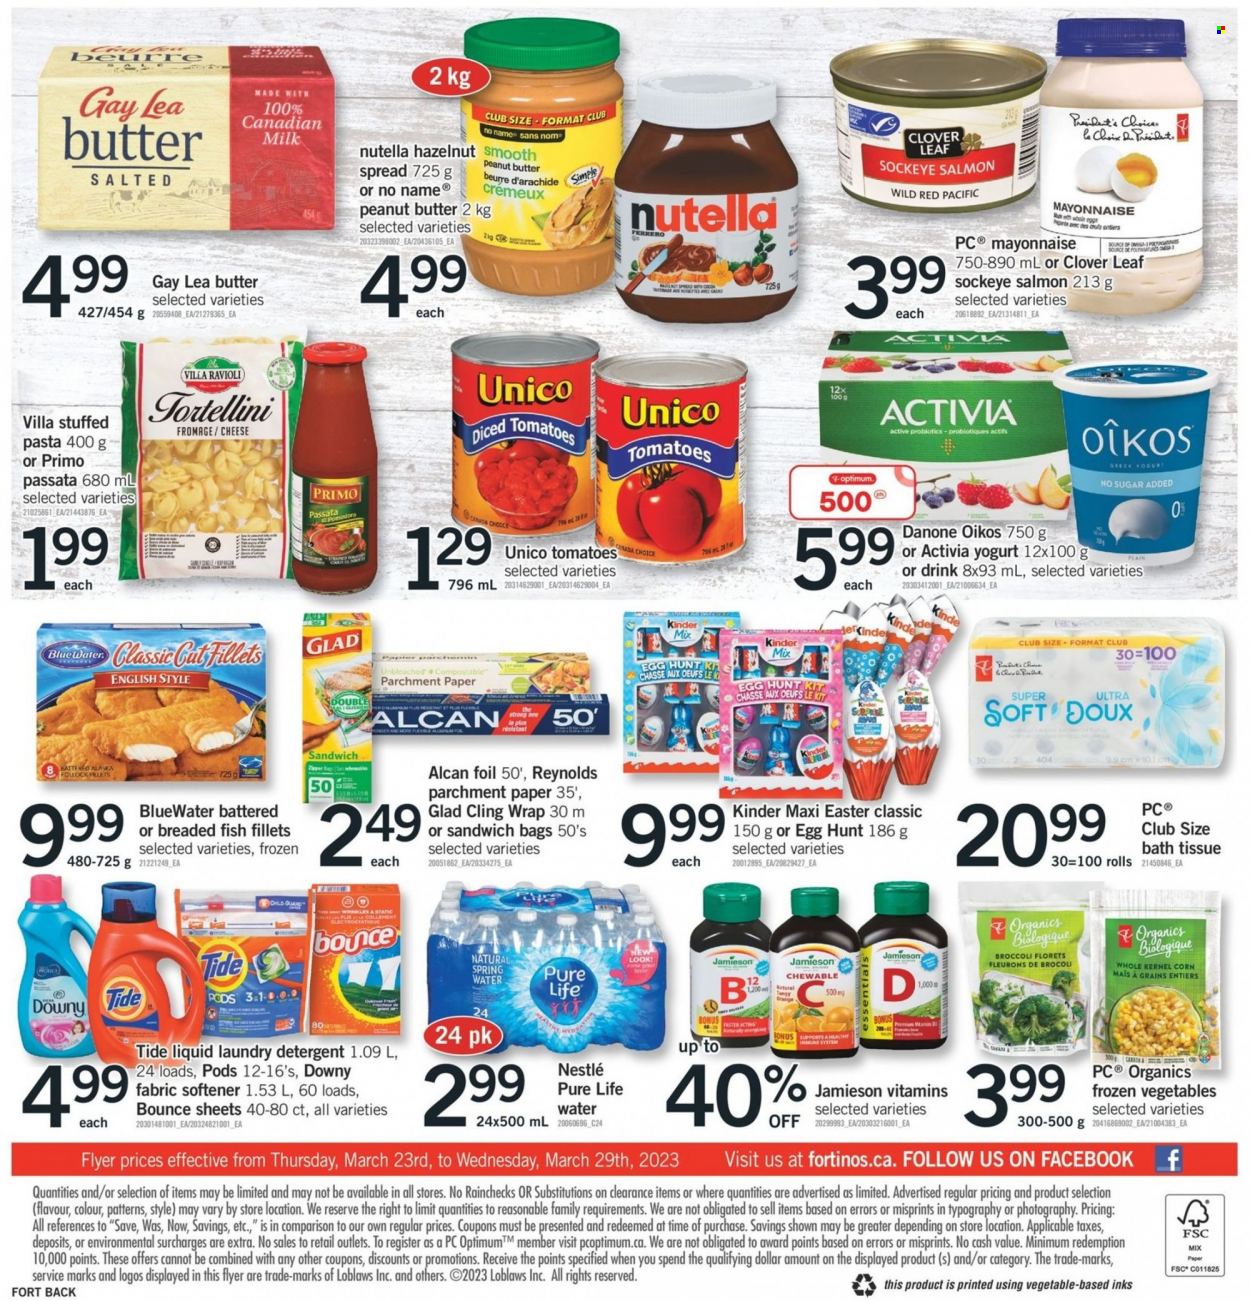 thumbnail - Fortinos Flyer - March 23, 2023 - March 29, 2023 - Sales products - broccoli, corn, tomatoes, oranges, fish fillets, salmon, fish, No Name, ravioli, pasta, breaded fish, cheese, Président, greek yoghurt, yoghurt, Clover, Activia, Oikos, milk, mayonnaise, frozen vegetables, chocolate egg, peanut butter, spring water, Pure Life Water, water, bath tissue, Tide, fabric softener, laundry detergent, Bounce, Downy Laundry, paper, Optimum, probiotics, detergent, Nestlé, Nutella, Danone, Ferrero Rocher. Page 2.